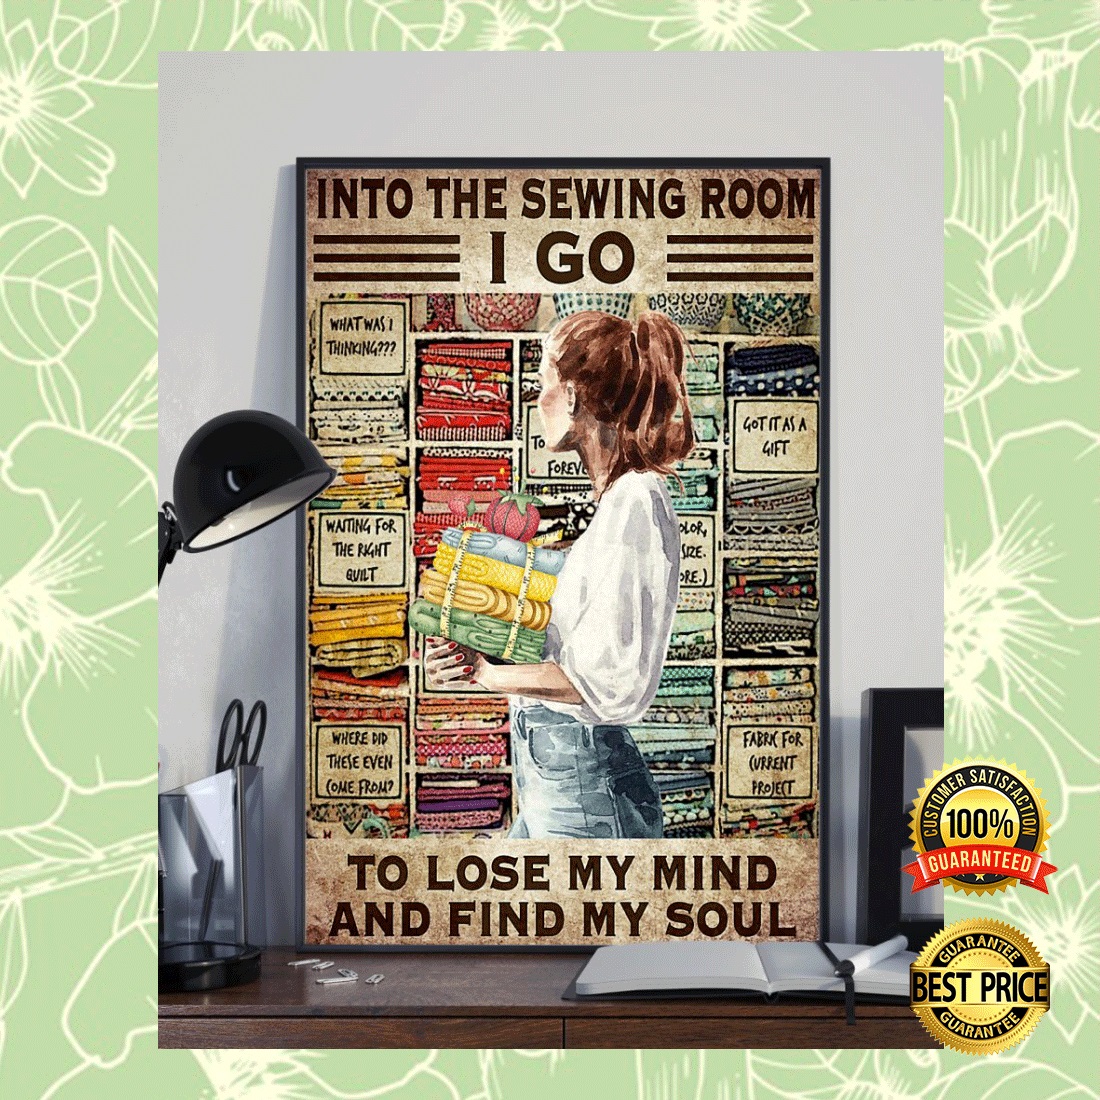 INTO THE SEWING ROOM I GO TO LOSE MY MIND AND FIND MY SOUL POSTER